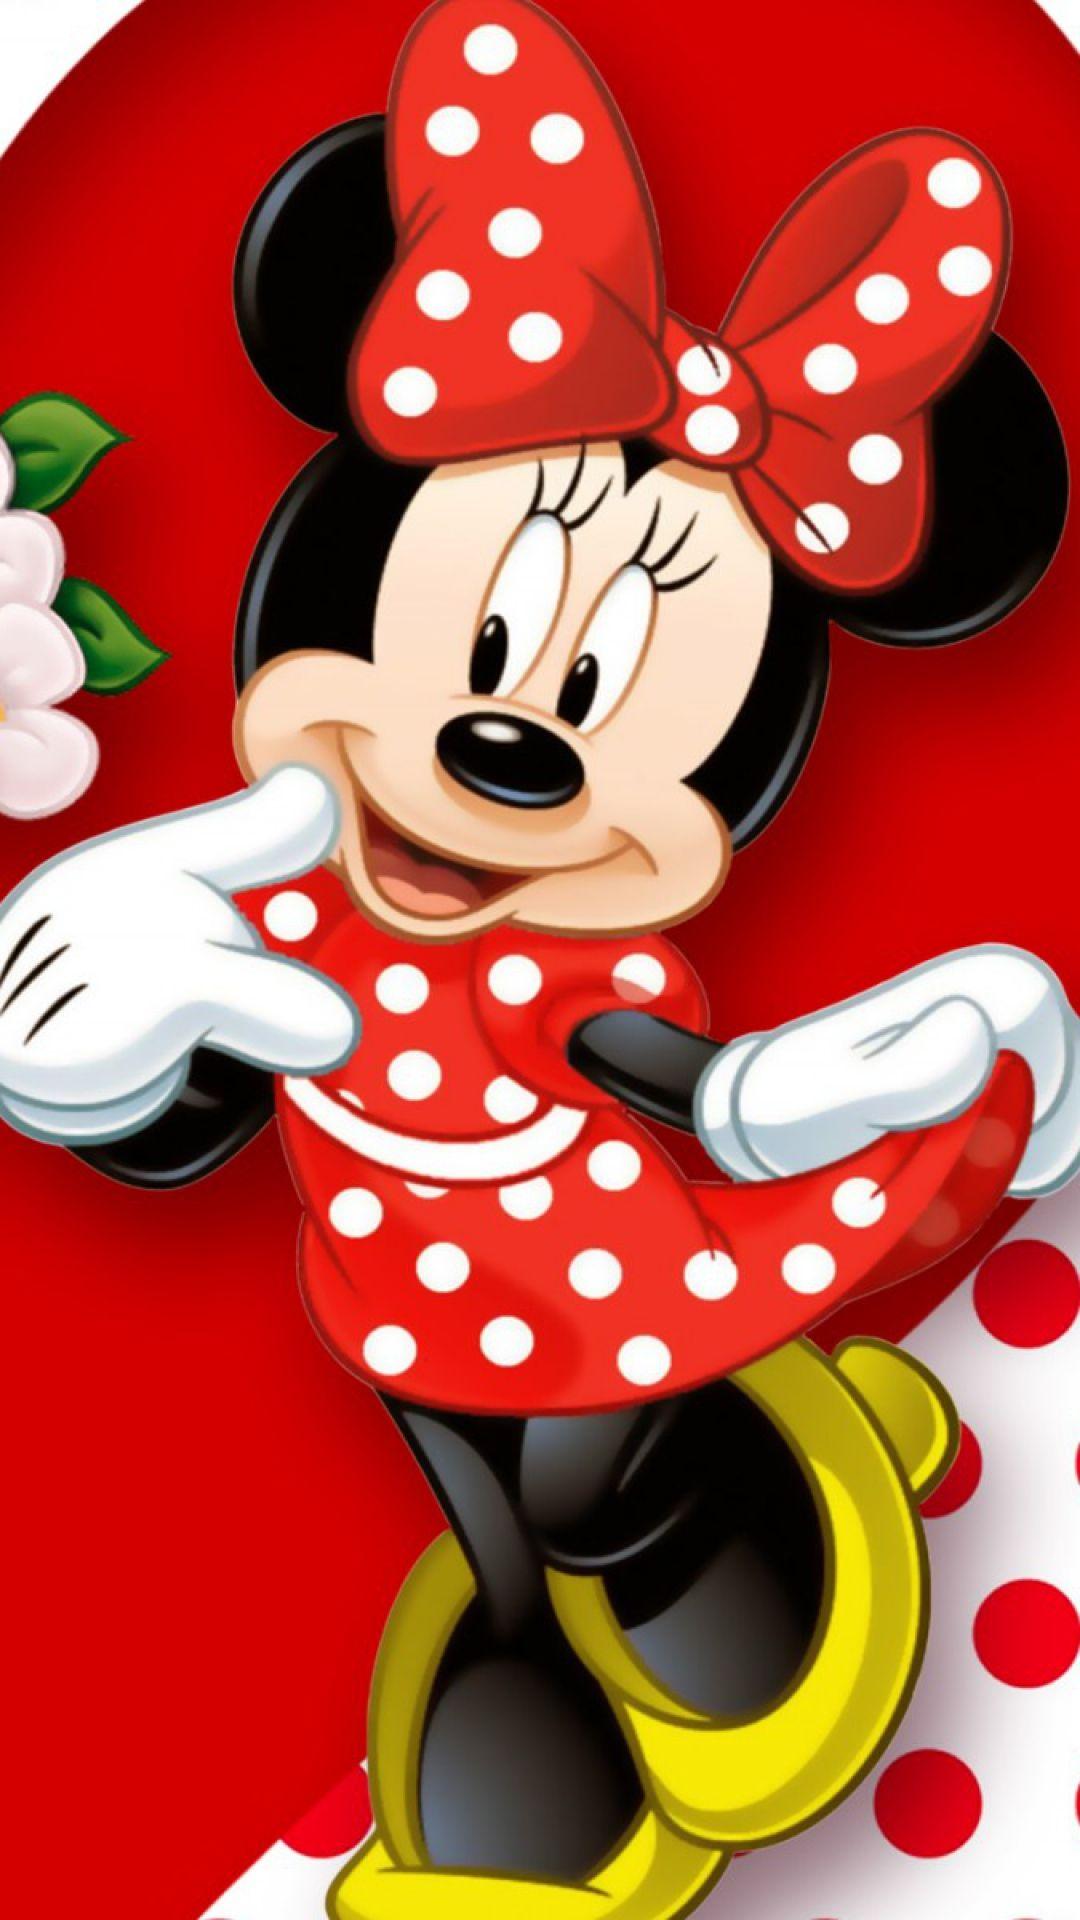 Image result for minnie mouse. Disney. Minnie mouse